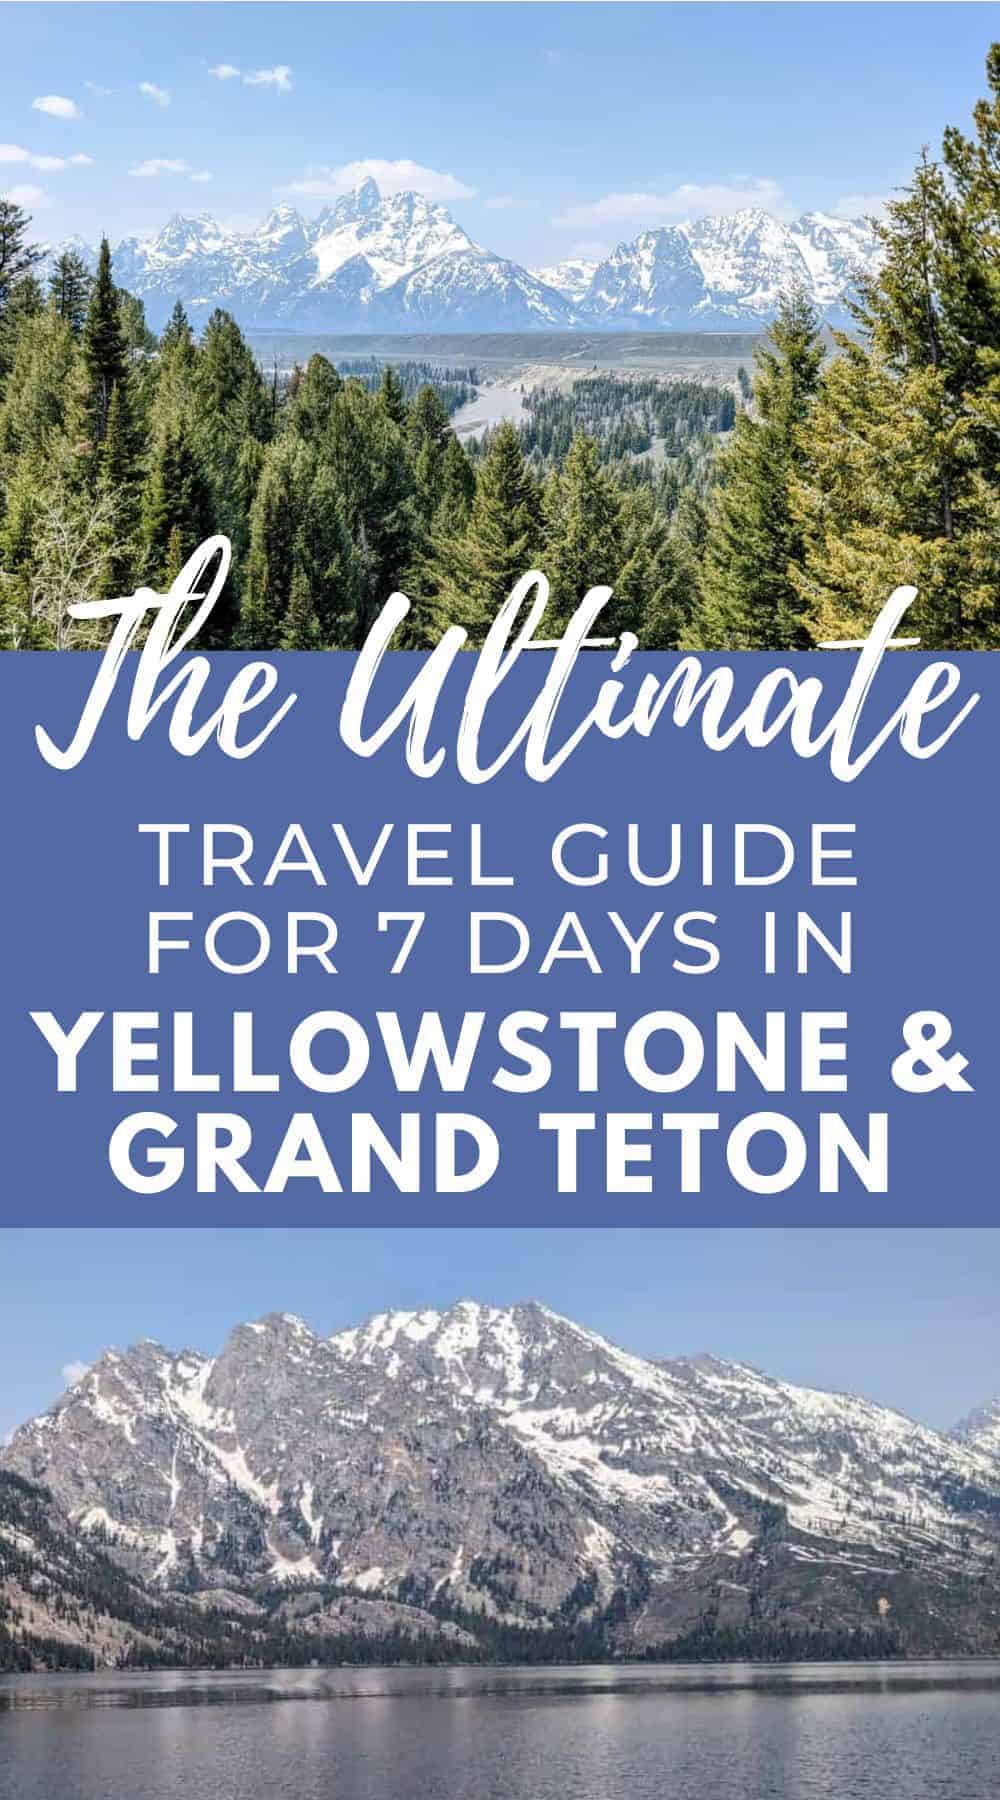 Pinterest images with two photos of the mountains at Grand Teton National Park. The text overlay reads, "The ultimate travel guide for 7 days in Yellowstone & Grand Teton."